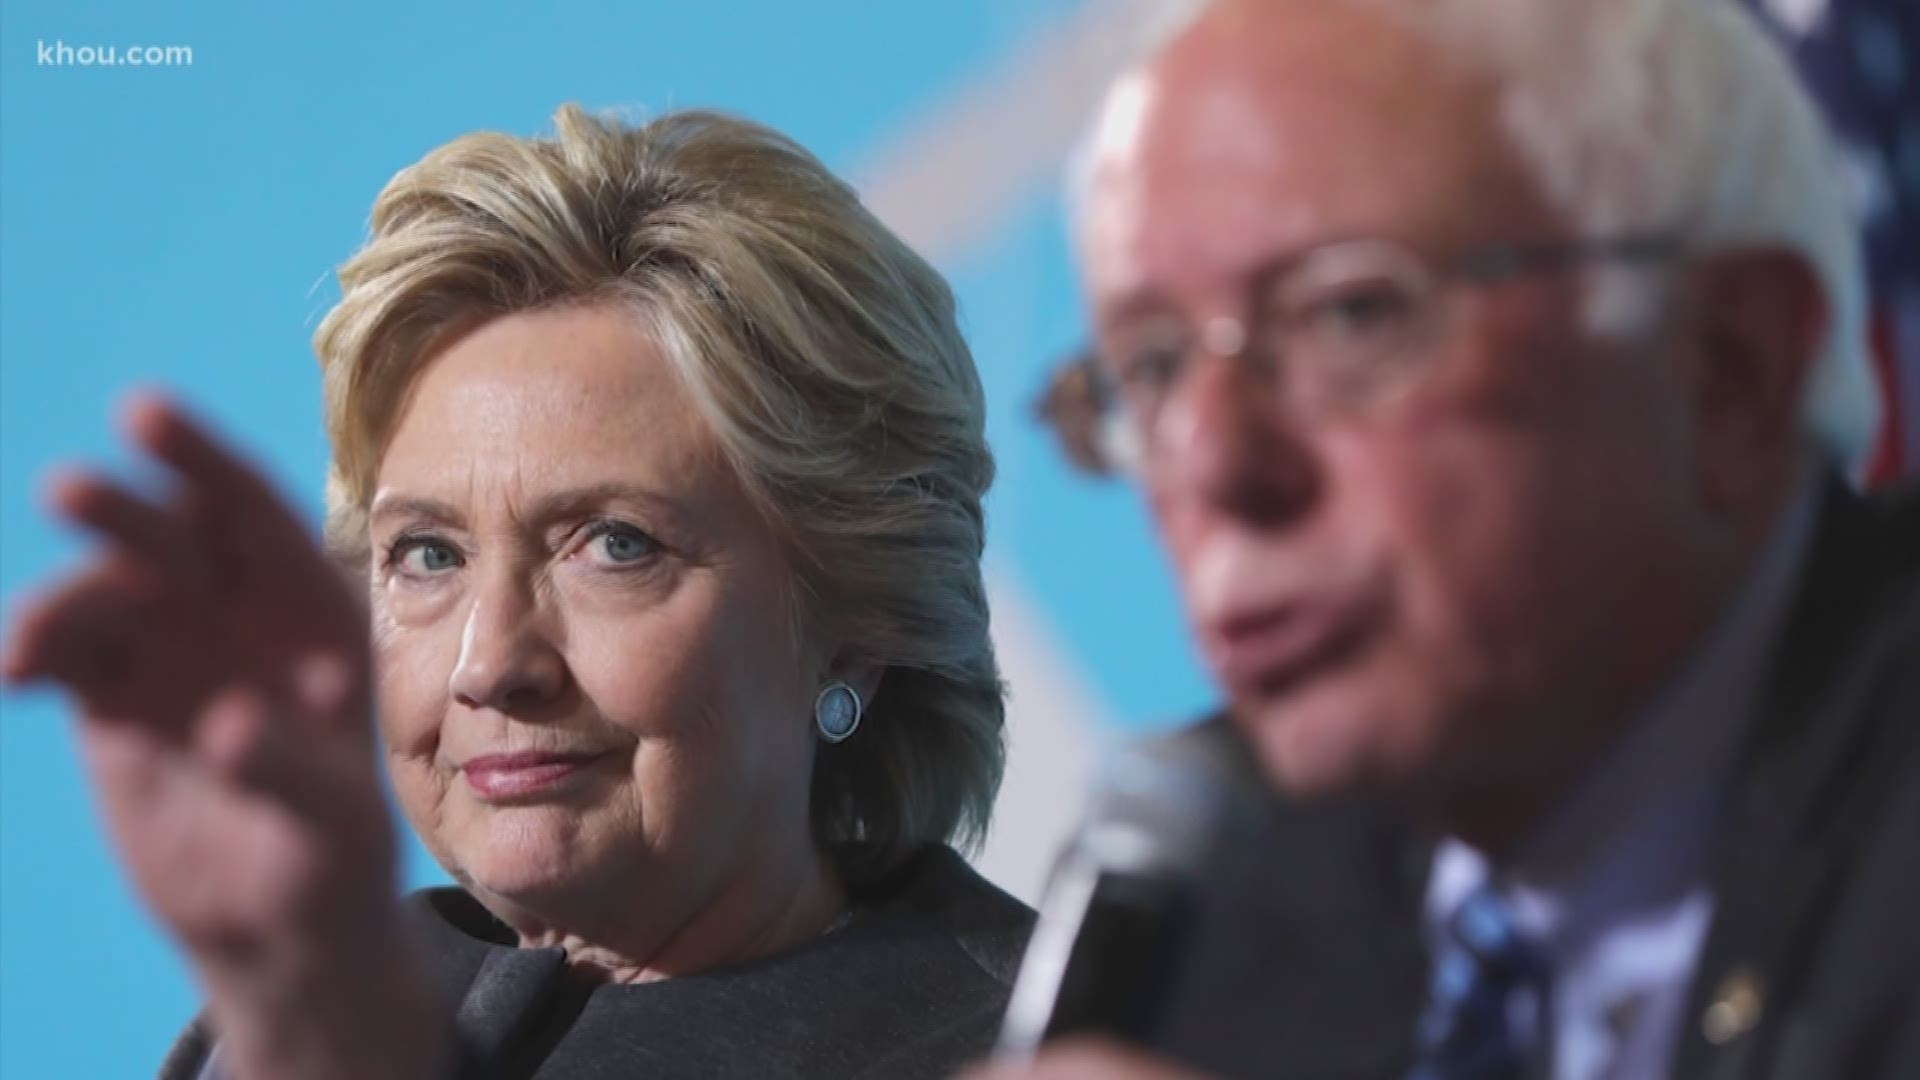 Clinton reveals there's still bad blood between her and Sen. Sanders.